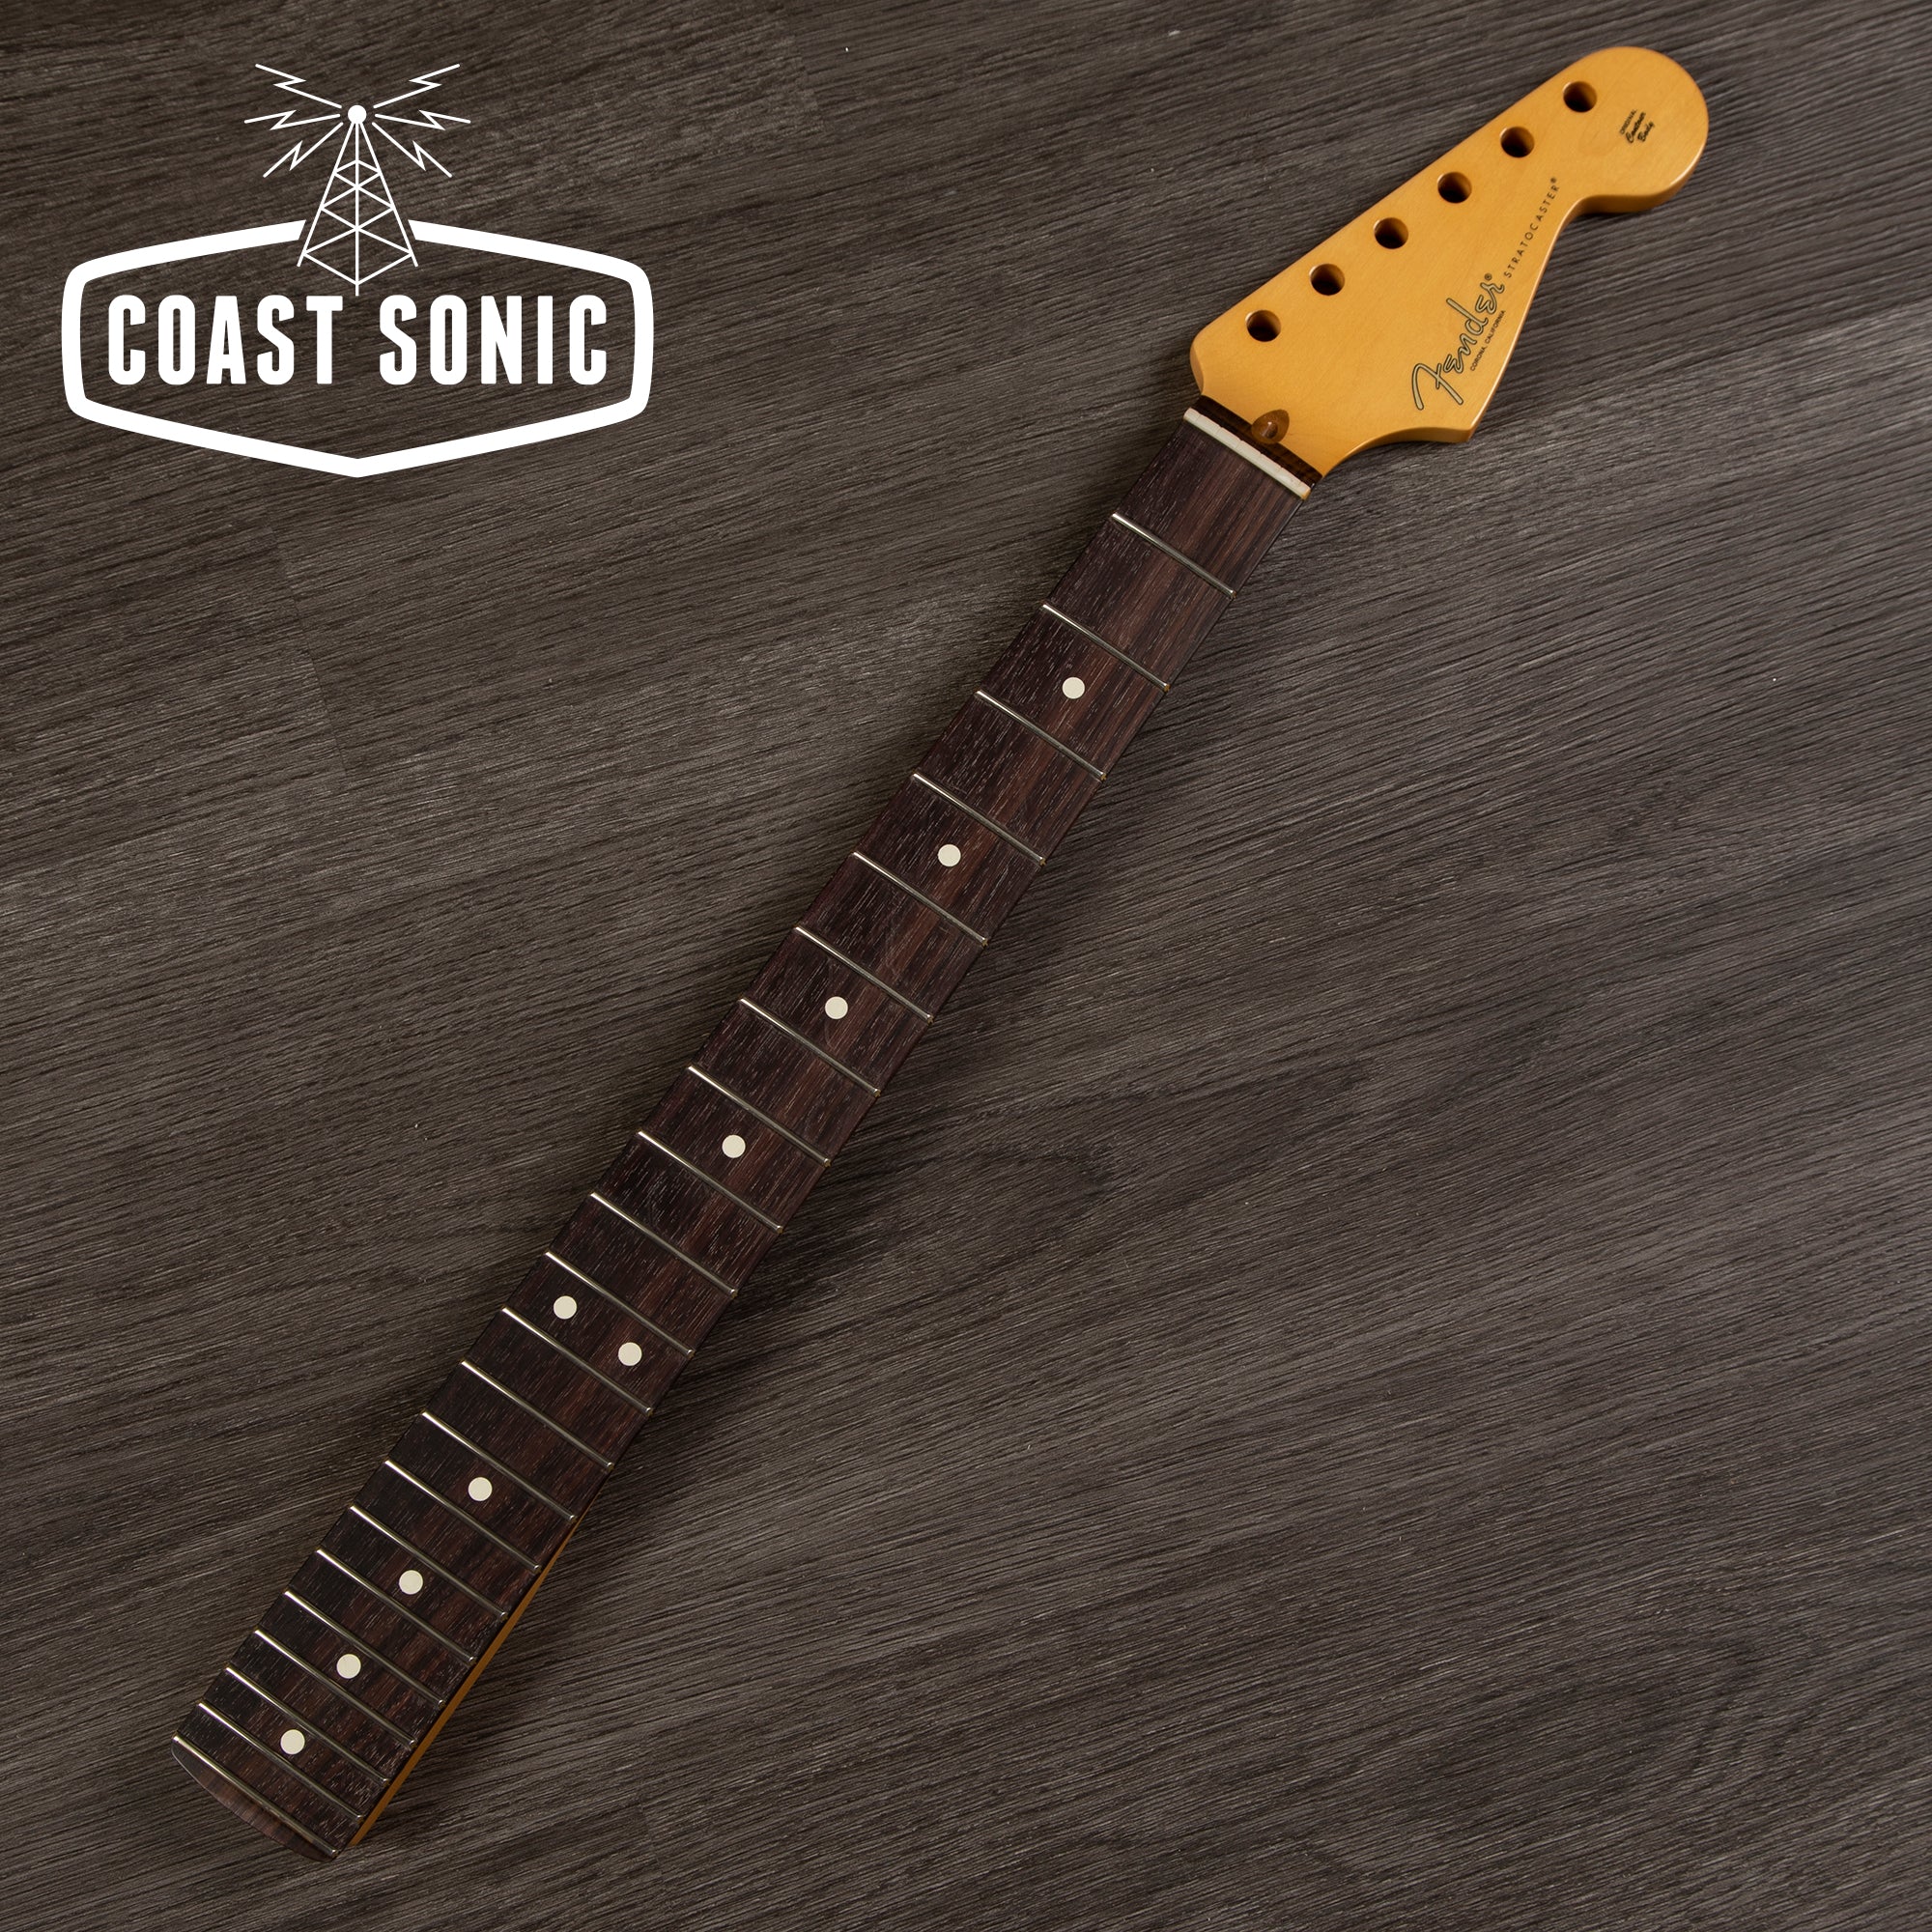 Fender American Pro II Stratocaster Neck - Rosewood